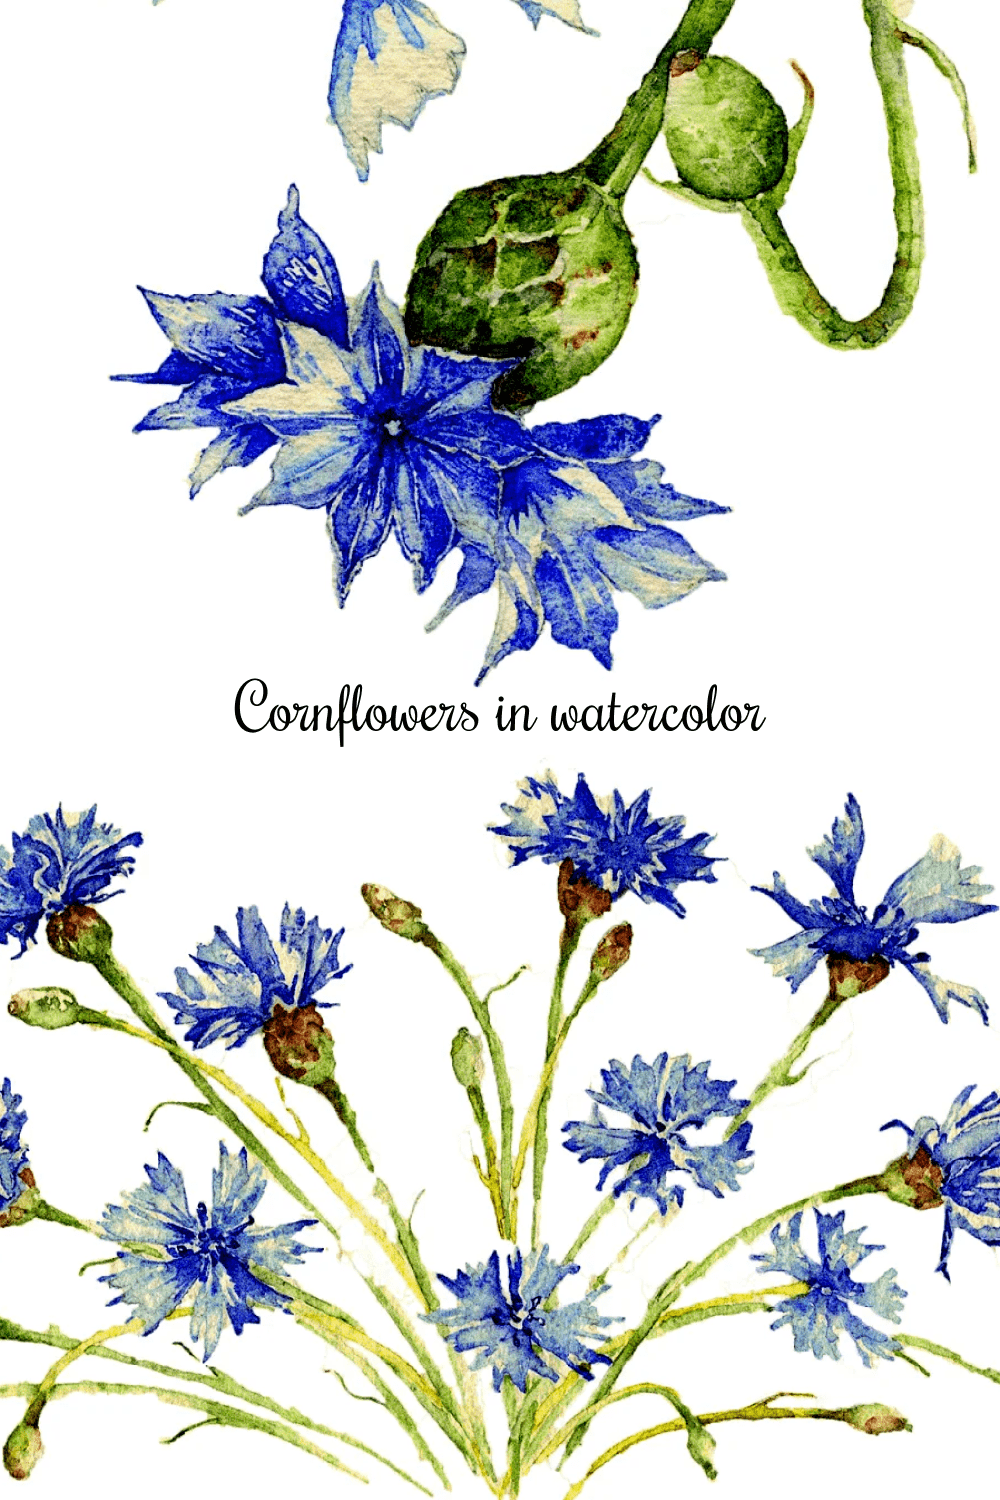 Cornflowers in watercolor - pinterest image preview.